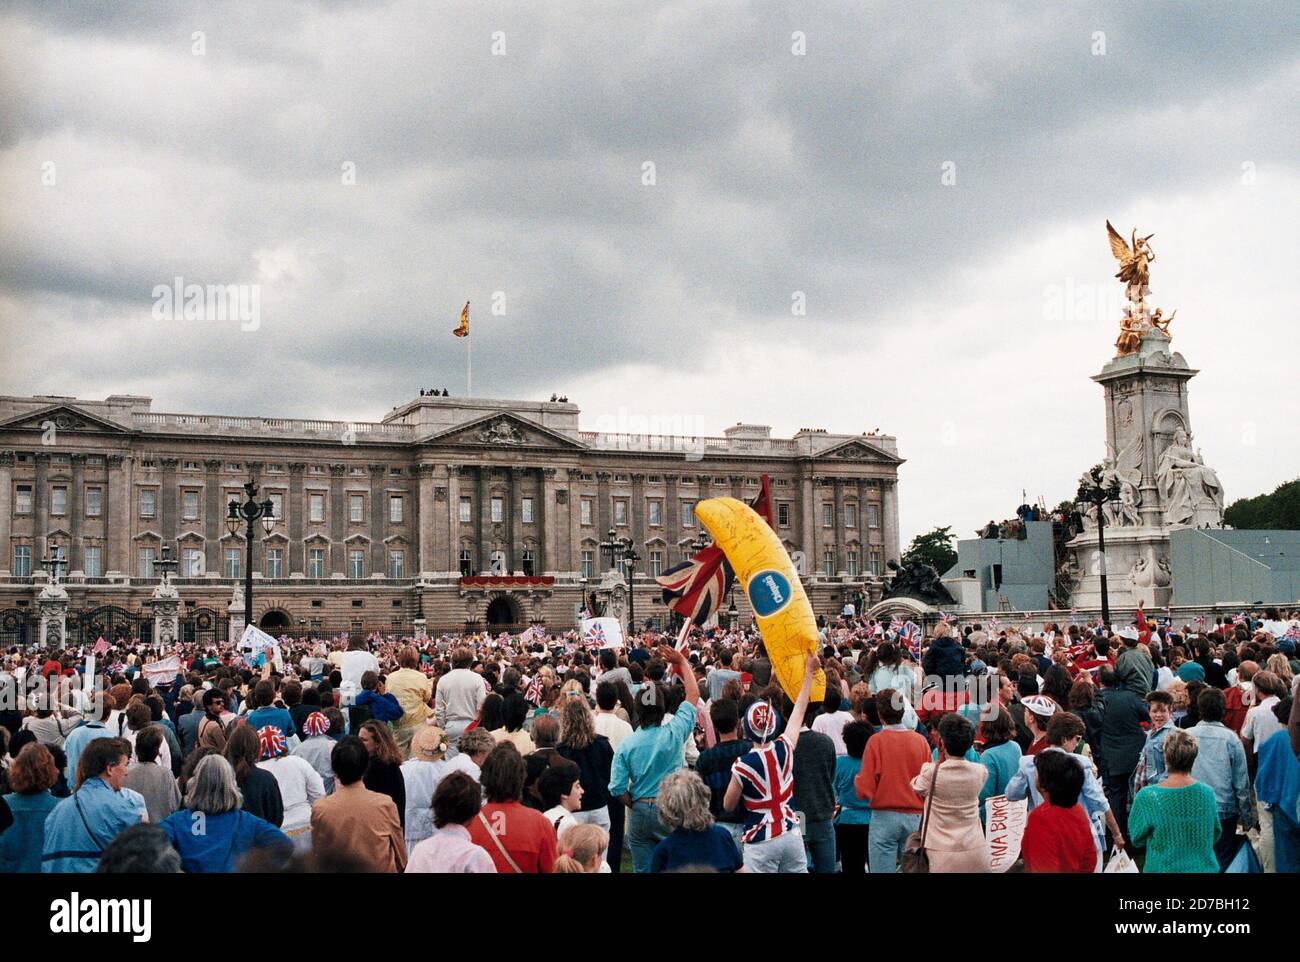 AJAXNETPHOTO. 23RD JULY, 1986. LONDON, ENGLAND. - CROWDS GATHER IN FRONT OF BUCKINGHAM PALACE TO SEE HRH PRINCE ANDREW AND SARAH FERGUSON - DUKE AND DUCHESS OF YORK -  WAVE TO CROWDS FROM PALACE BALCONY FOLLOWING THEIR WEDDING.  PHOTO: JONATHAN EASTLAND/AJAX REF:81403 1986 5 1 Stock Photo